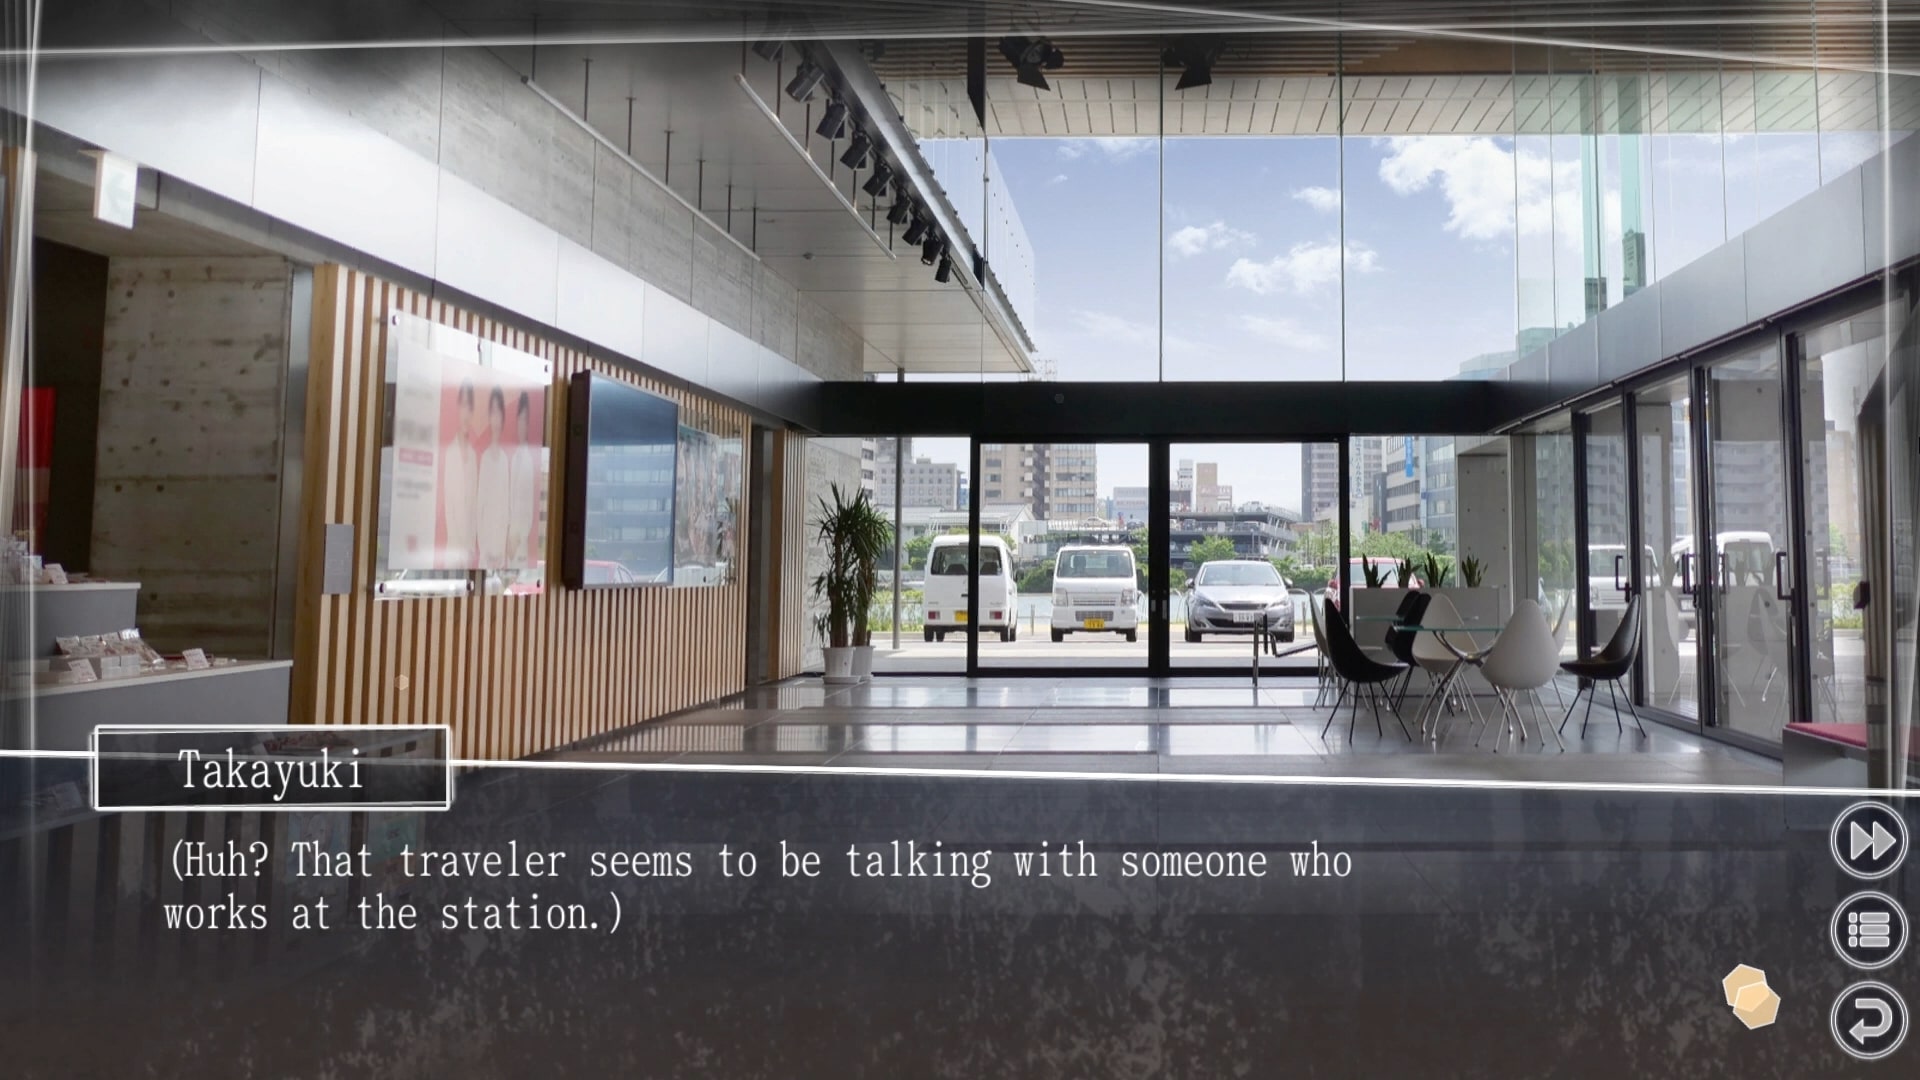 Root Letter Last Answer Additional Scenarios for Root Letter Last Answer Walkthrough - Scenario 1: Wandering Traveler - 87AB7A6